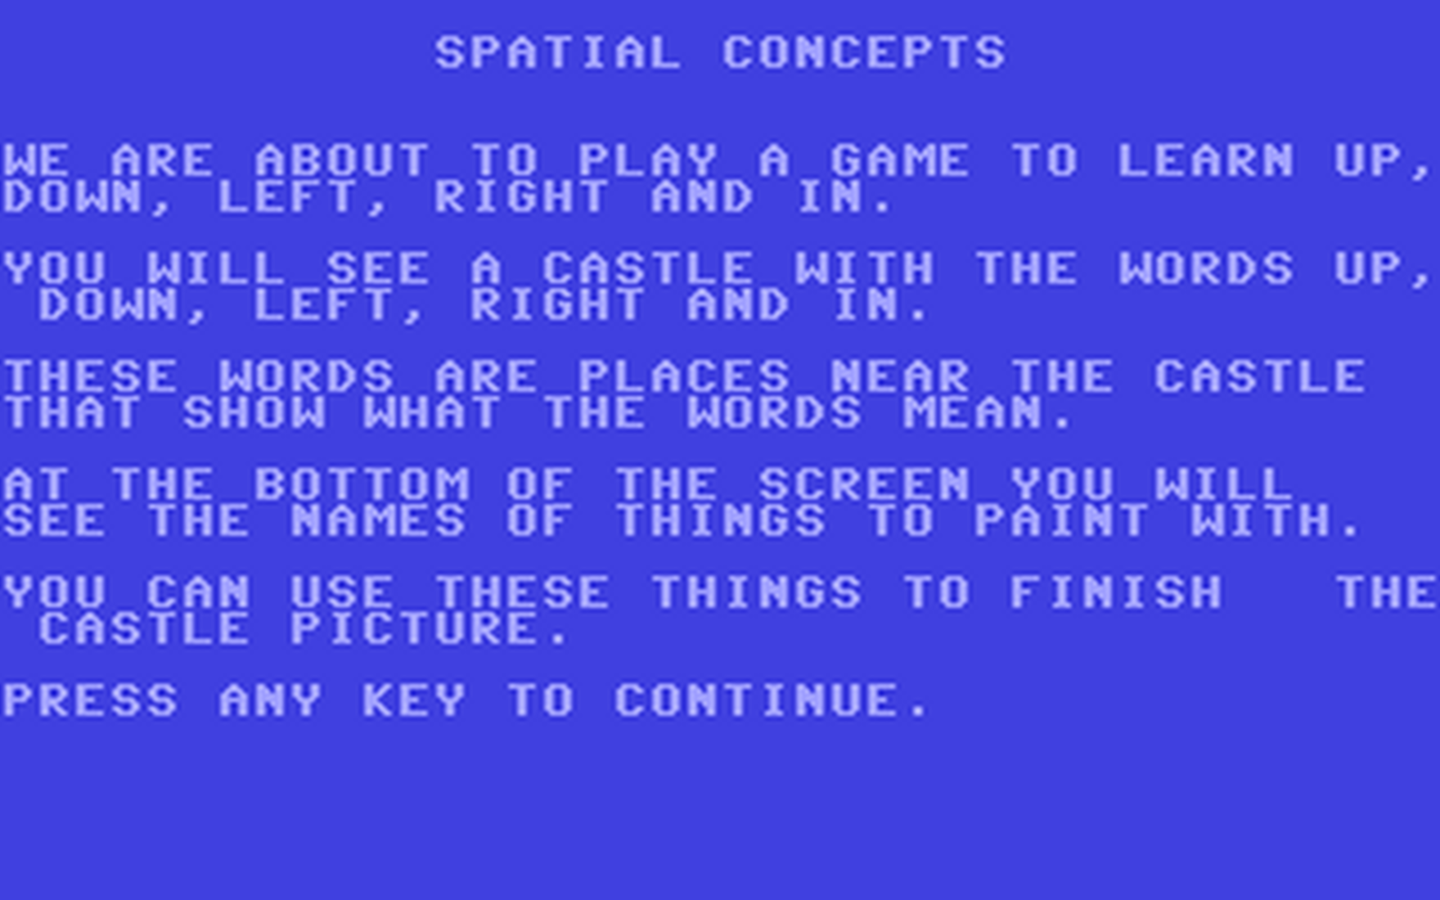 C64 GameBase Spatial_Concepts HPBooks 1984